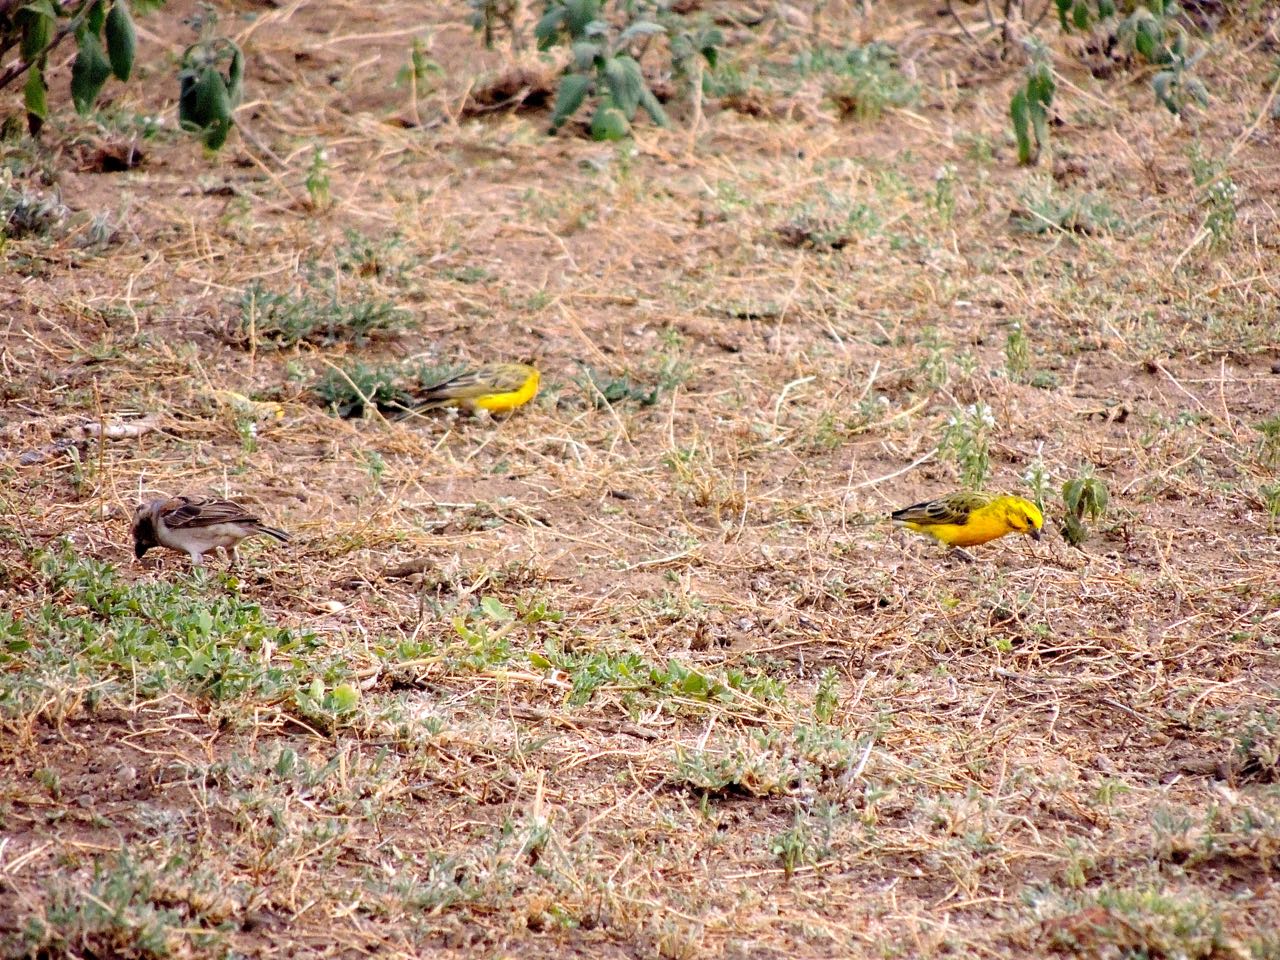 Kenya Rufous Sparrow and White-bellied Canaries